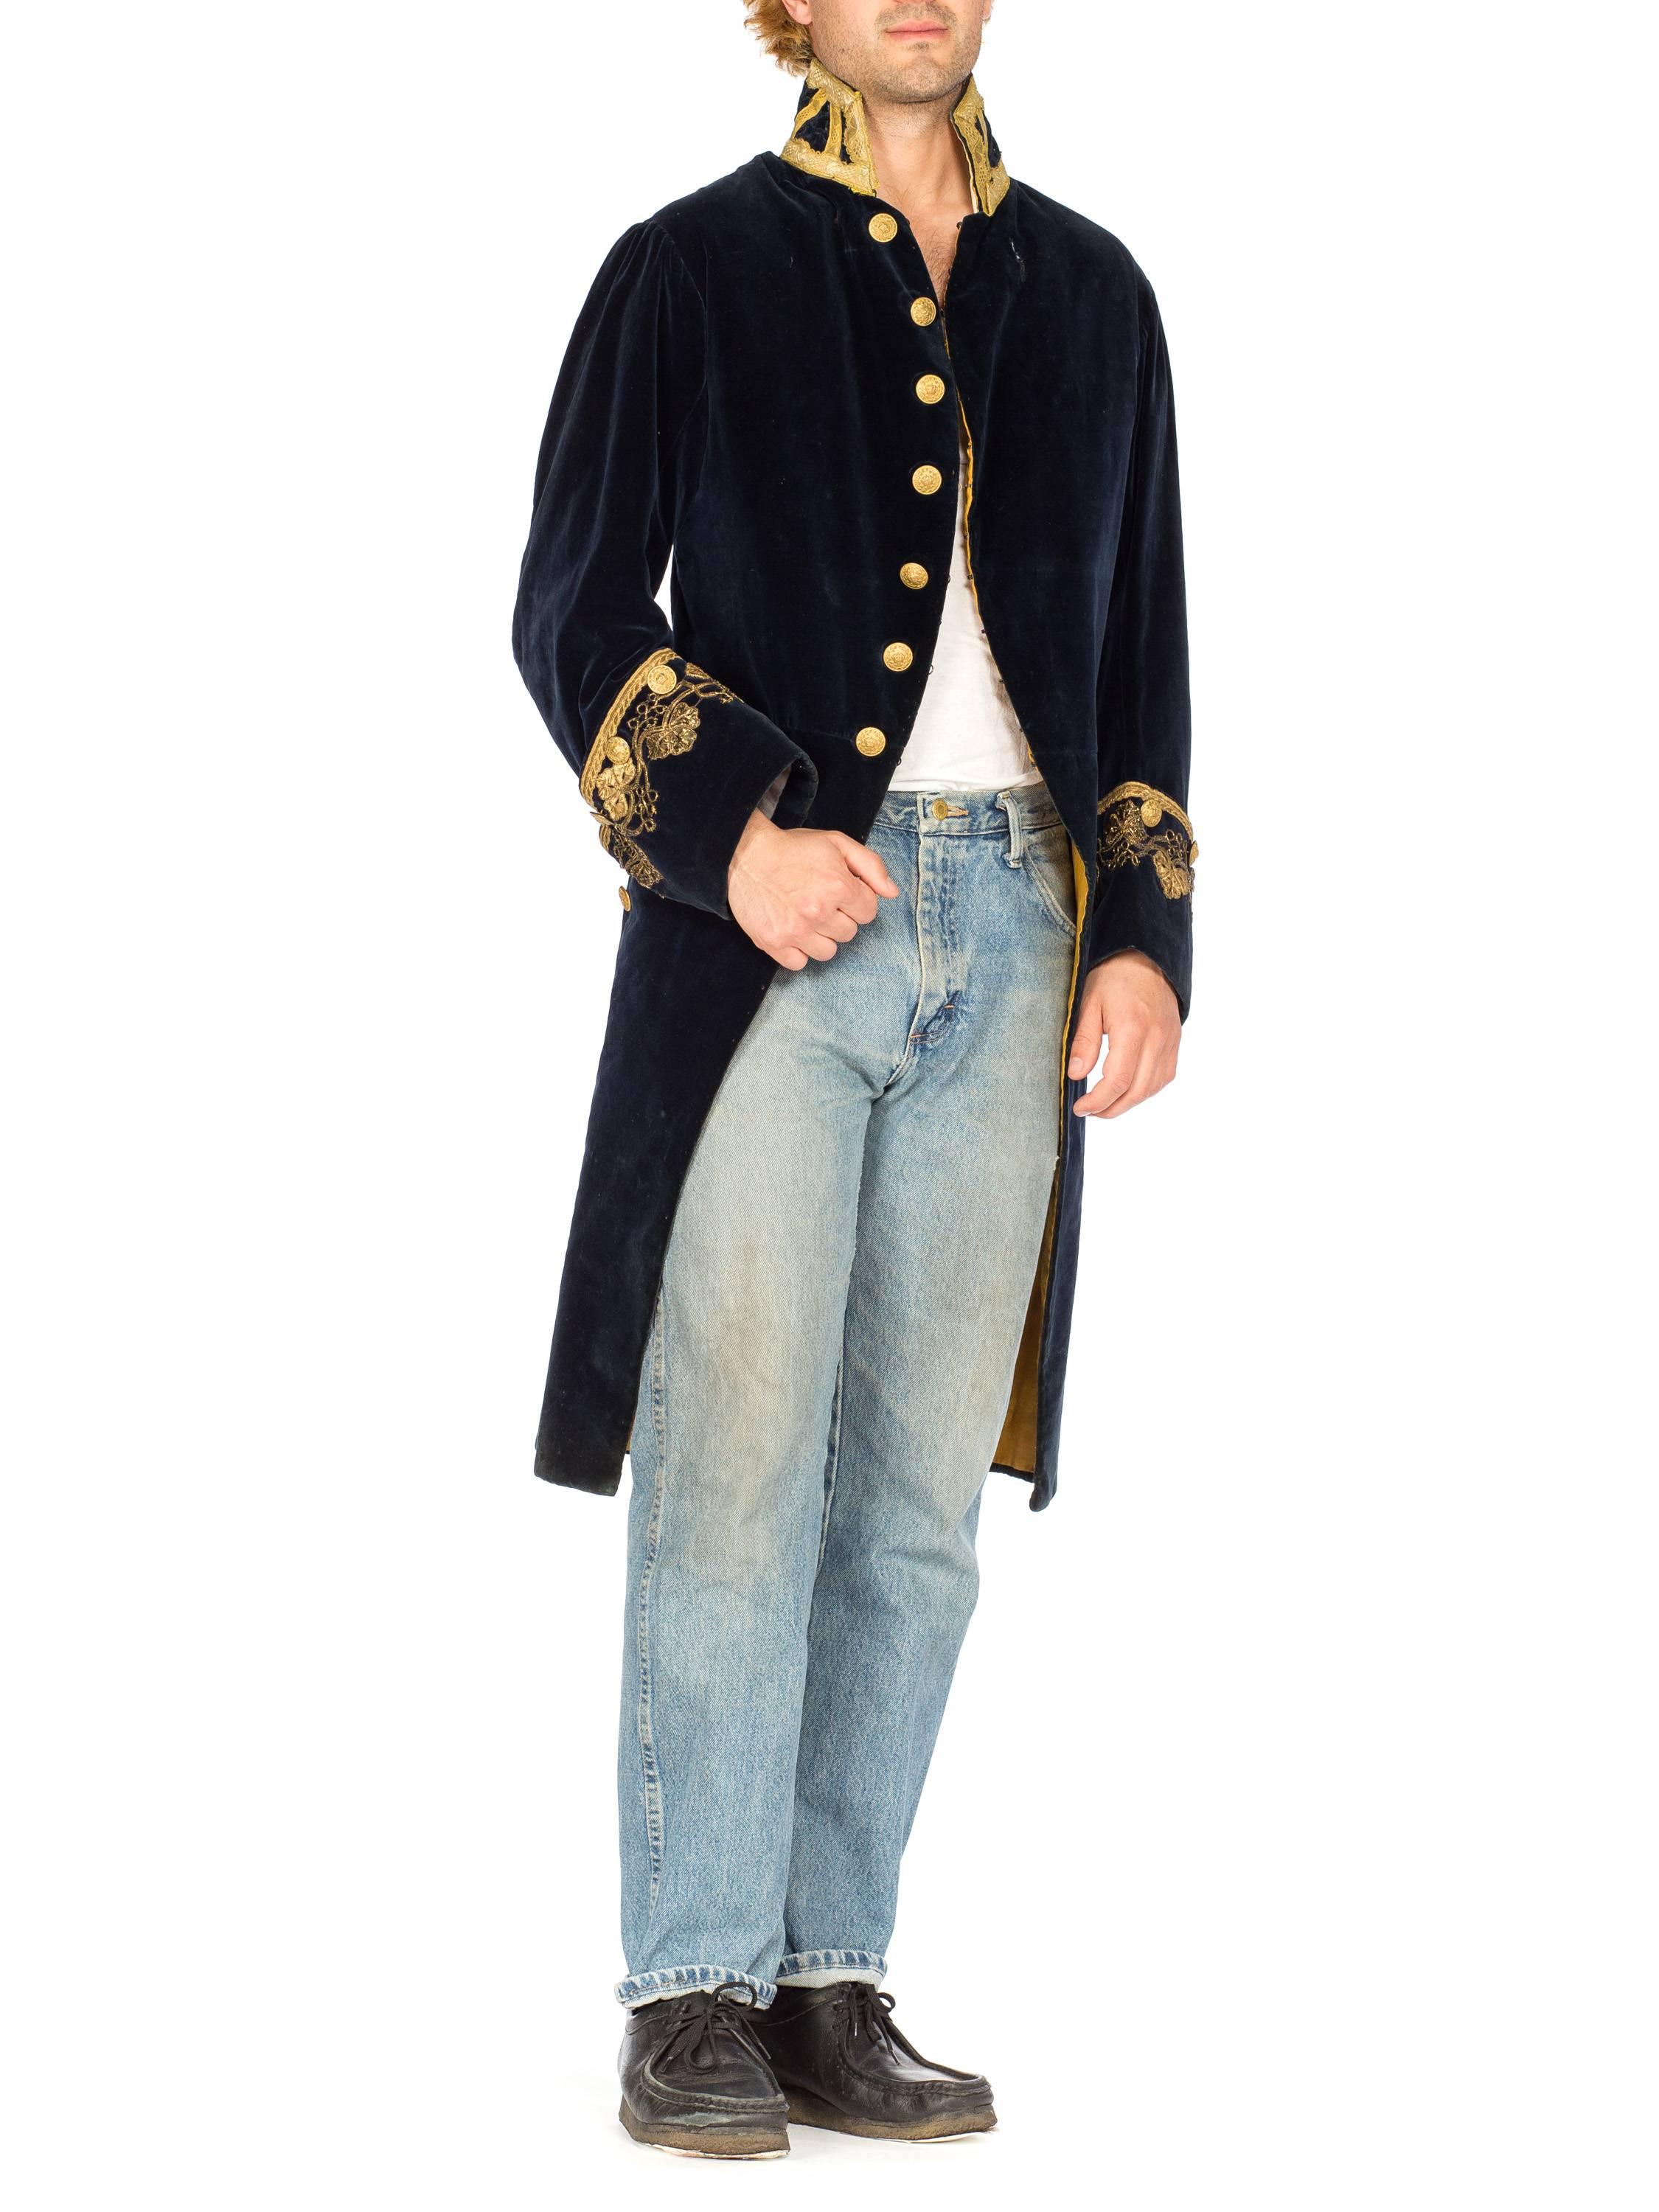 Victorian Men's Frock Coat in the 18th Century Style  2